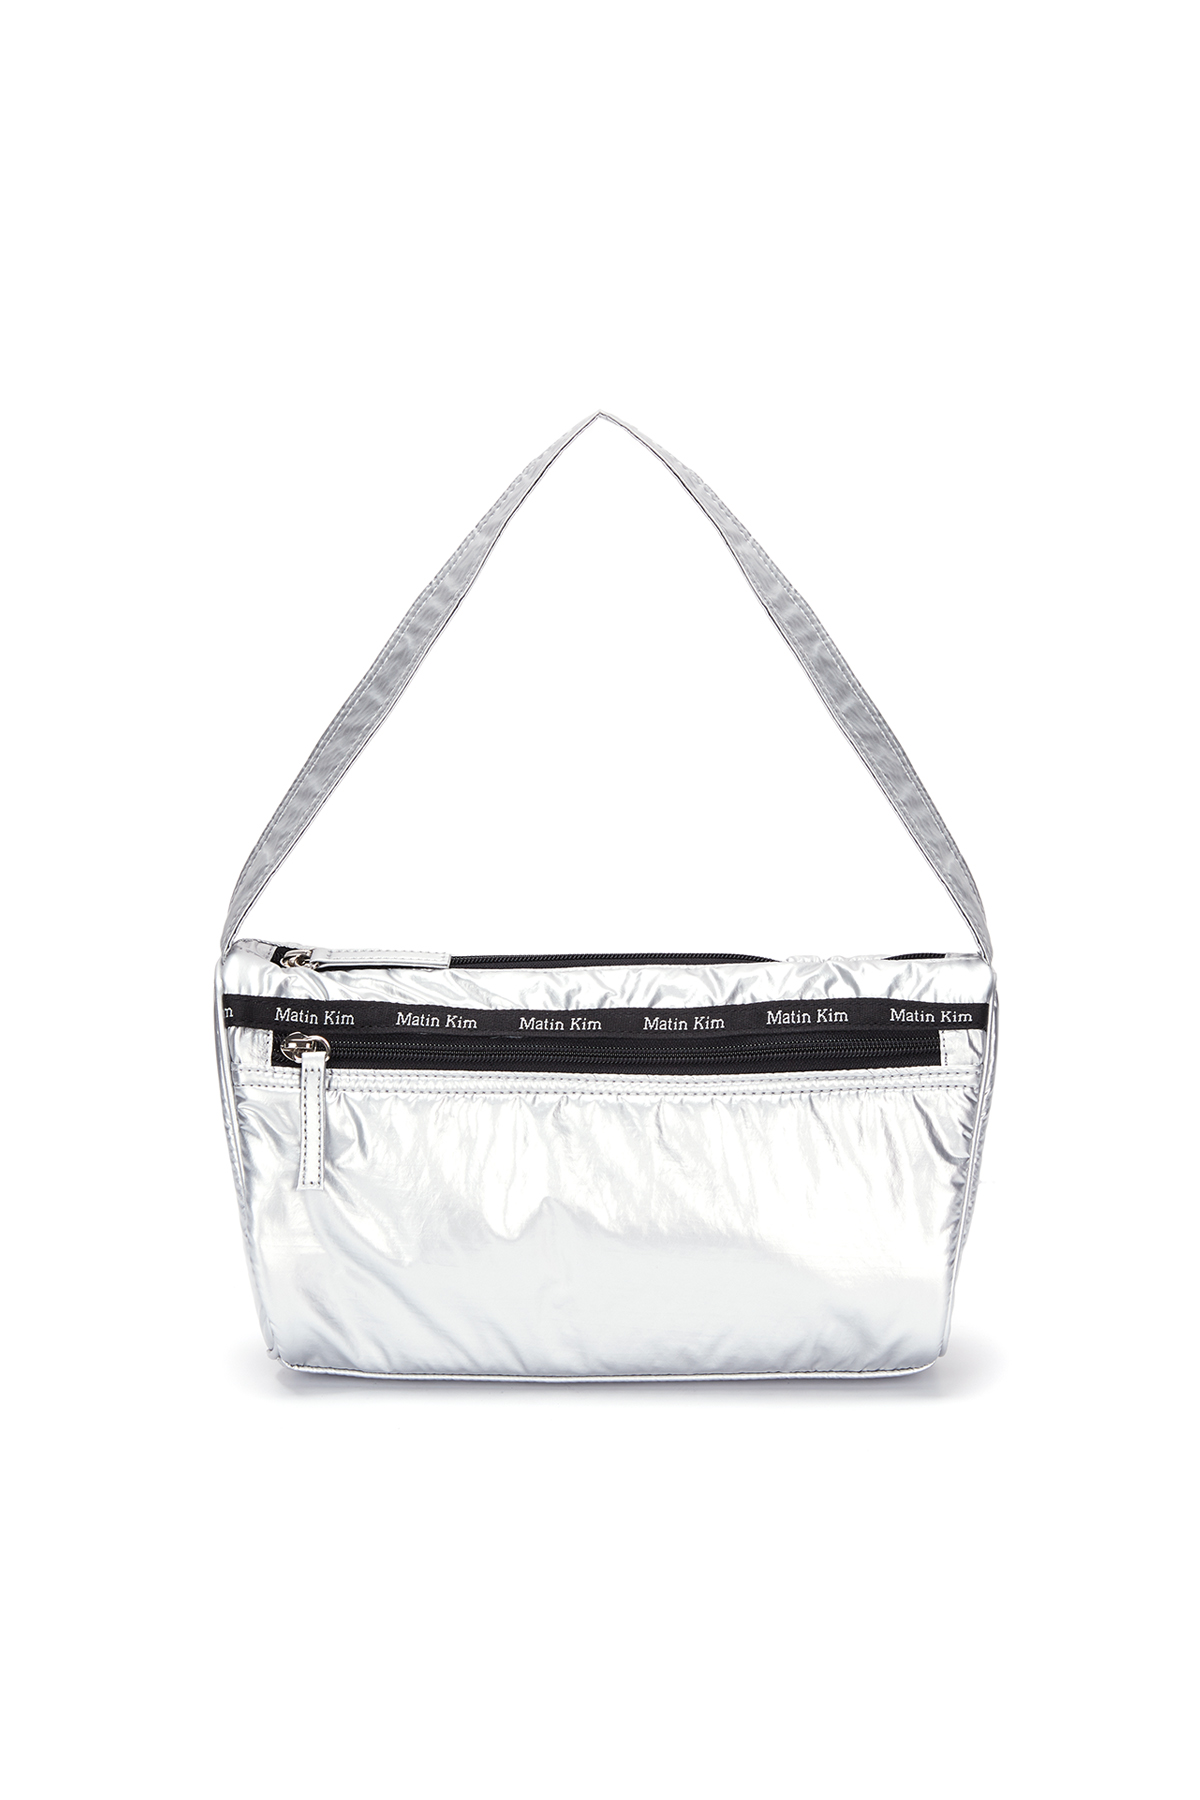 GLOSSY TOTE BAG IN SILVER - MATINKIM